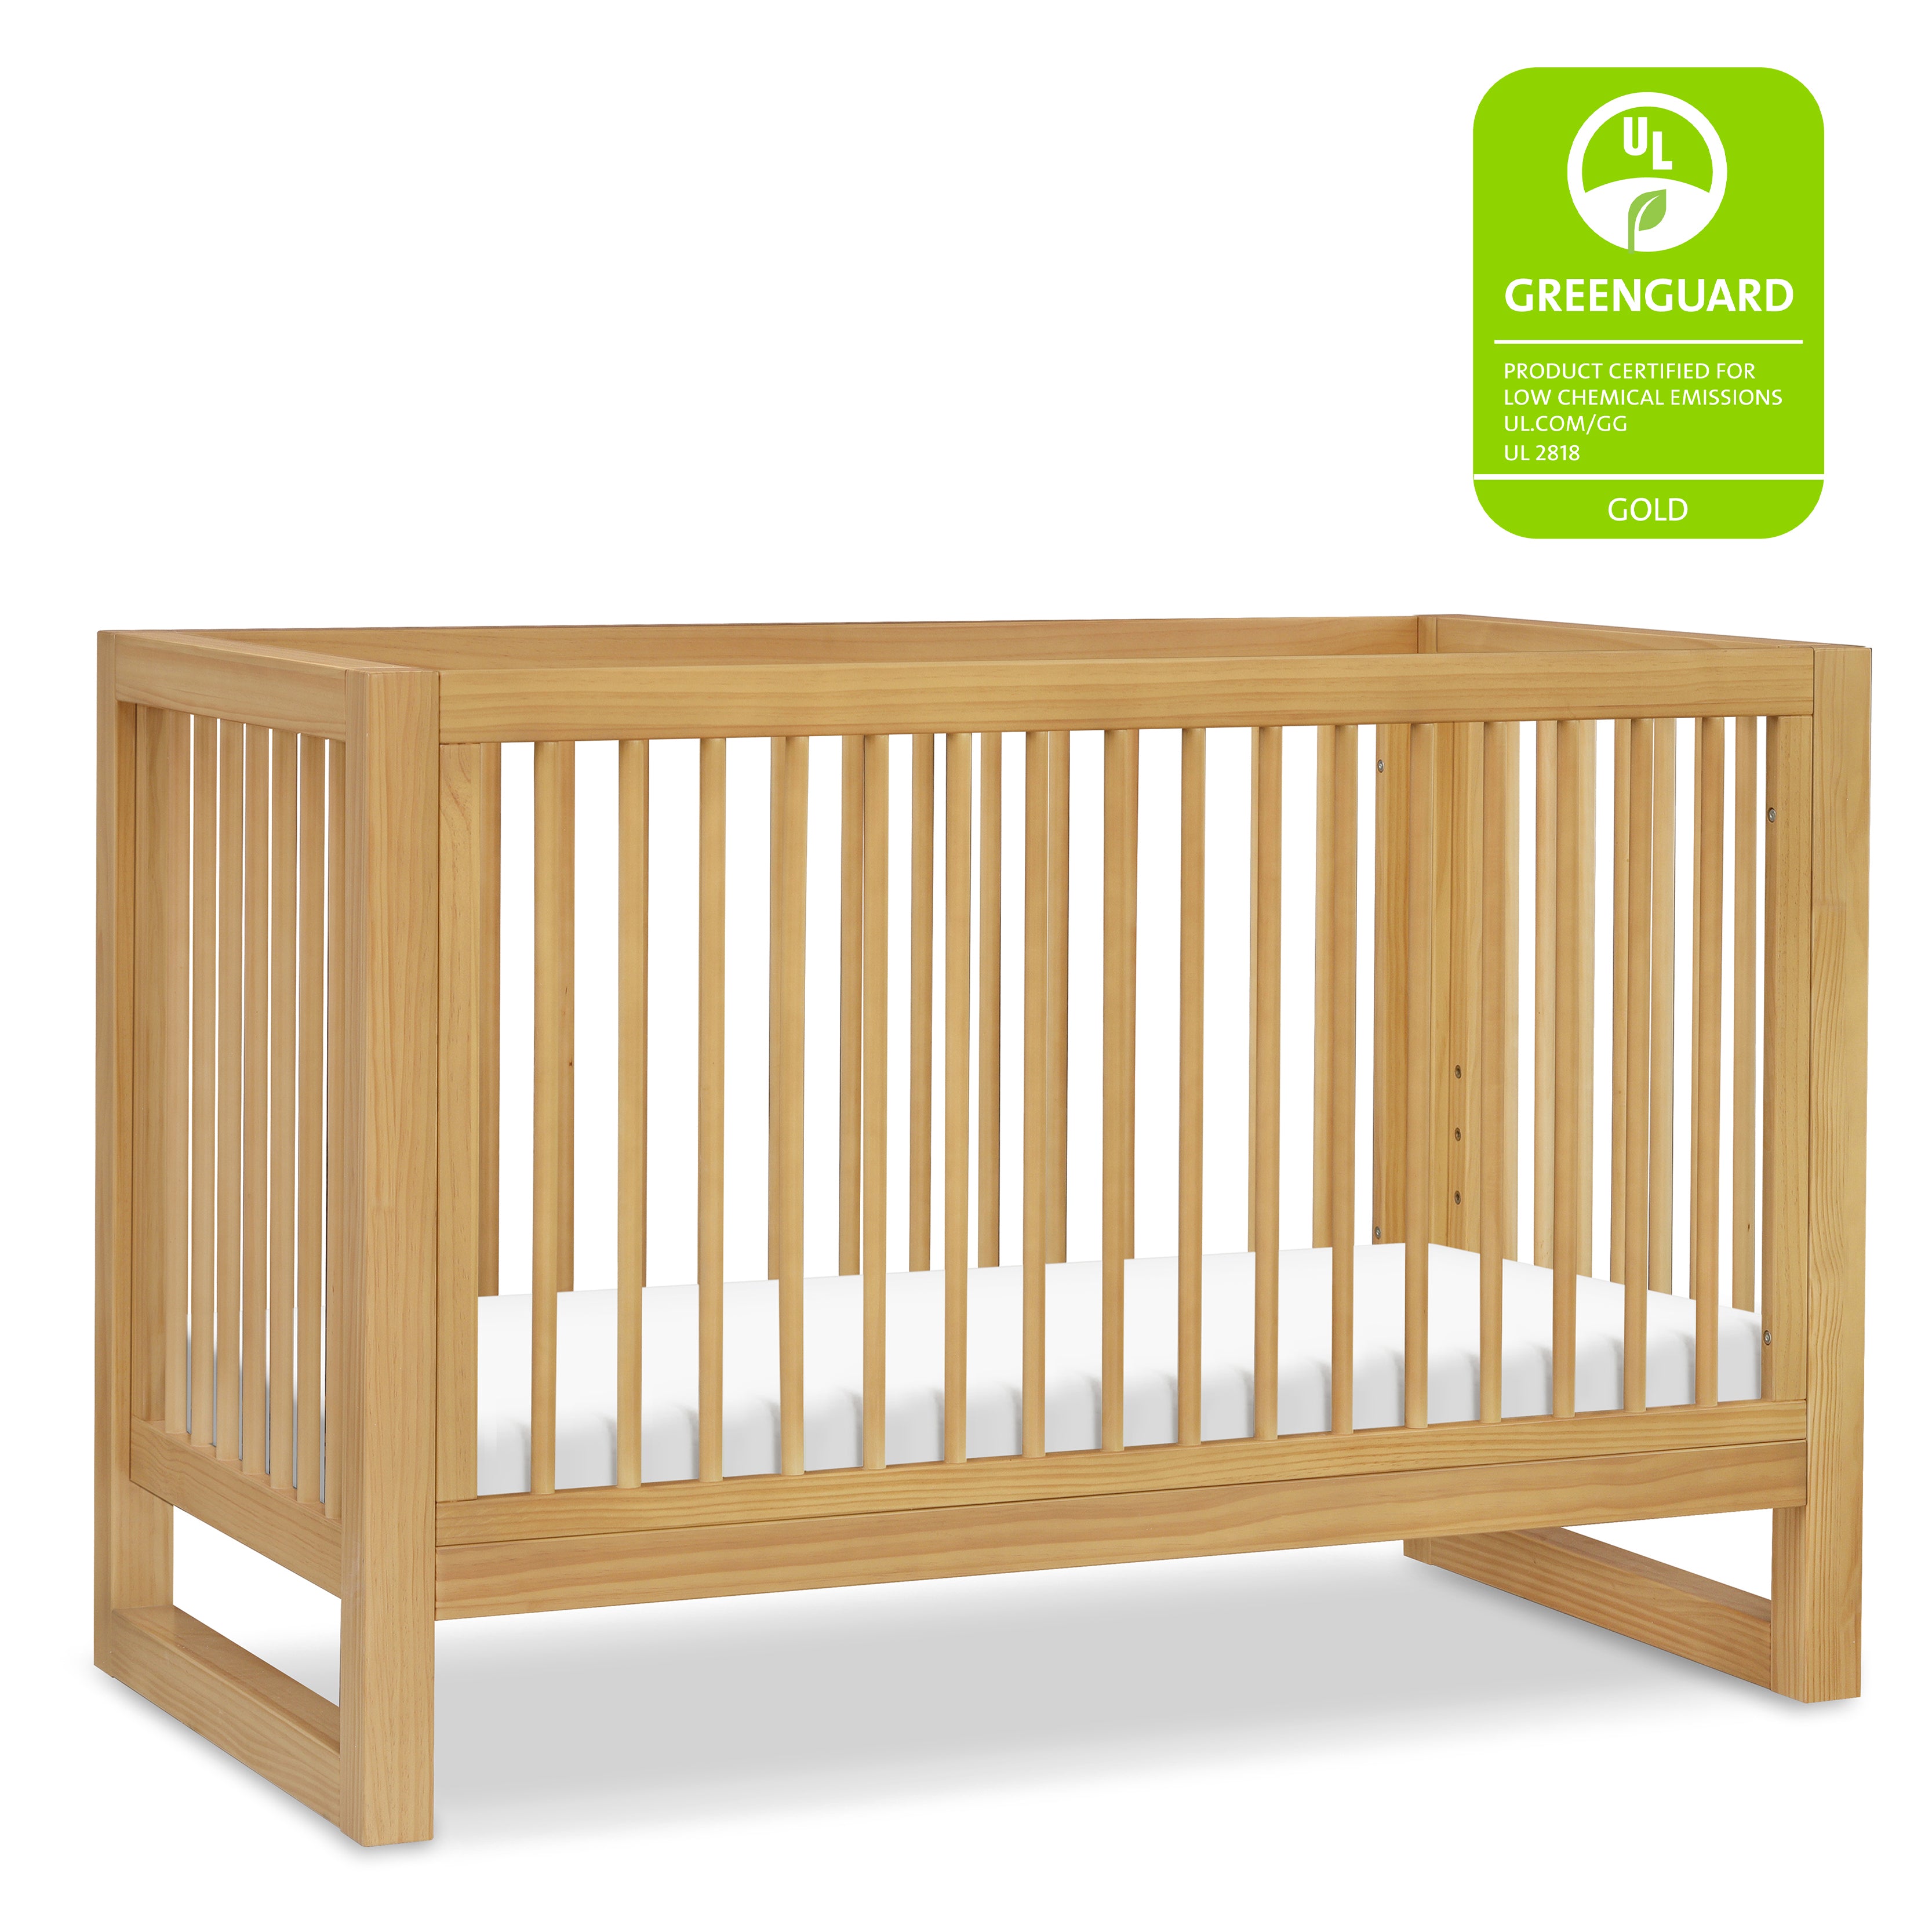 Nantucket 3-in-1 Convertible Crib with Toddler Bed Conversion Kit - Honey - Twinkle Twinkle Little One